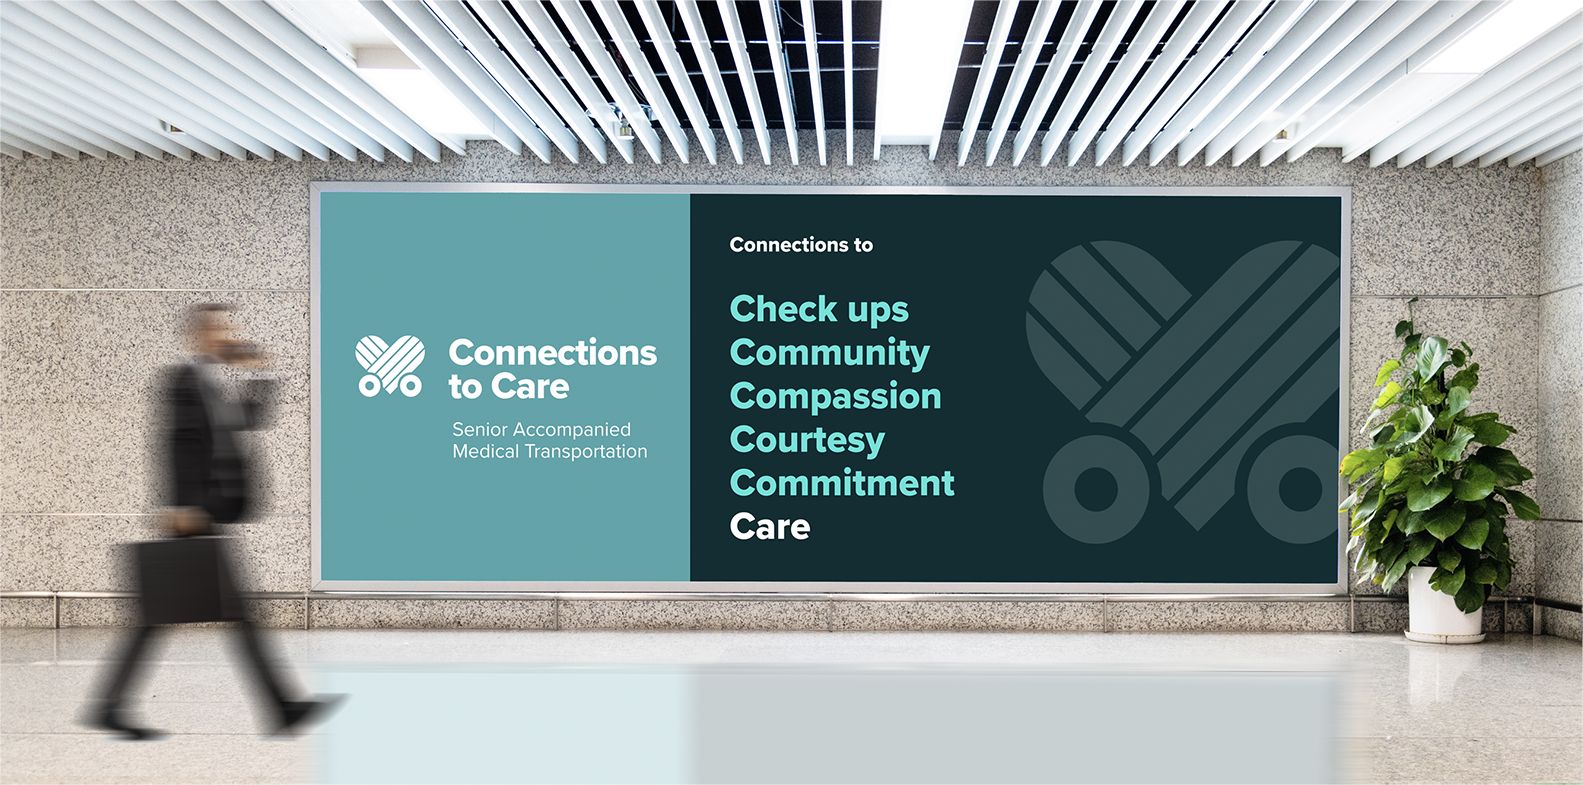 Connections to Care signage